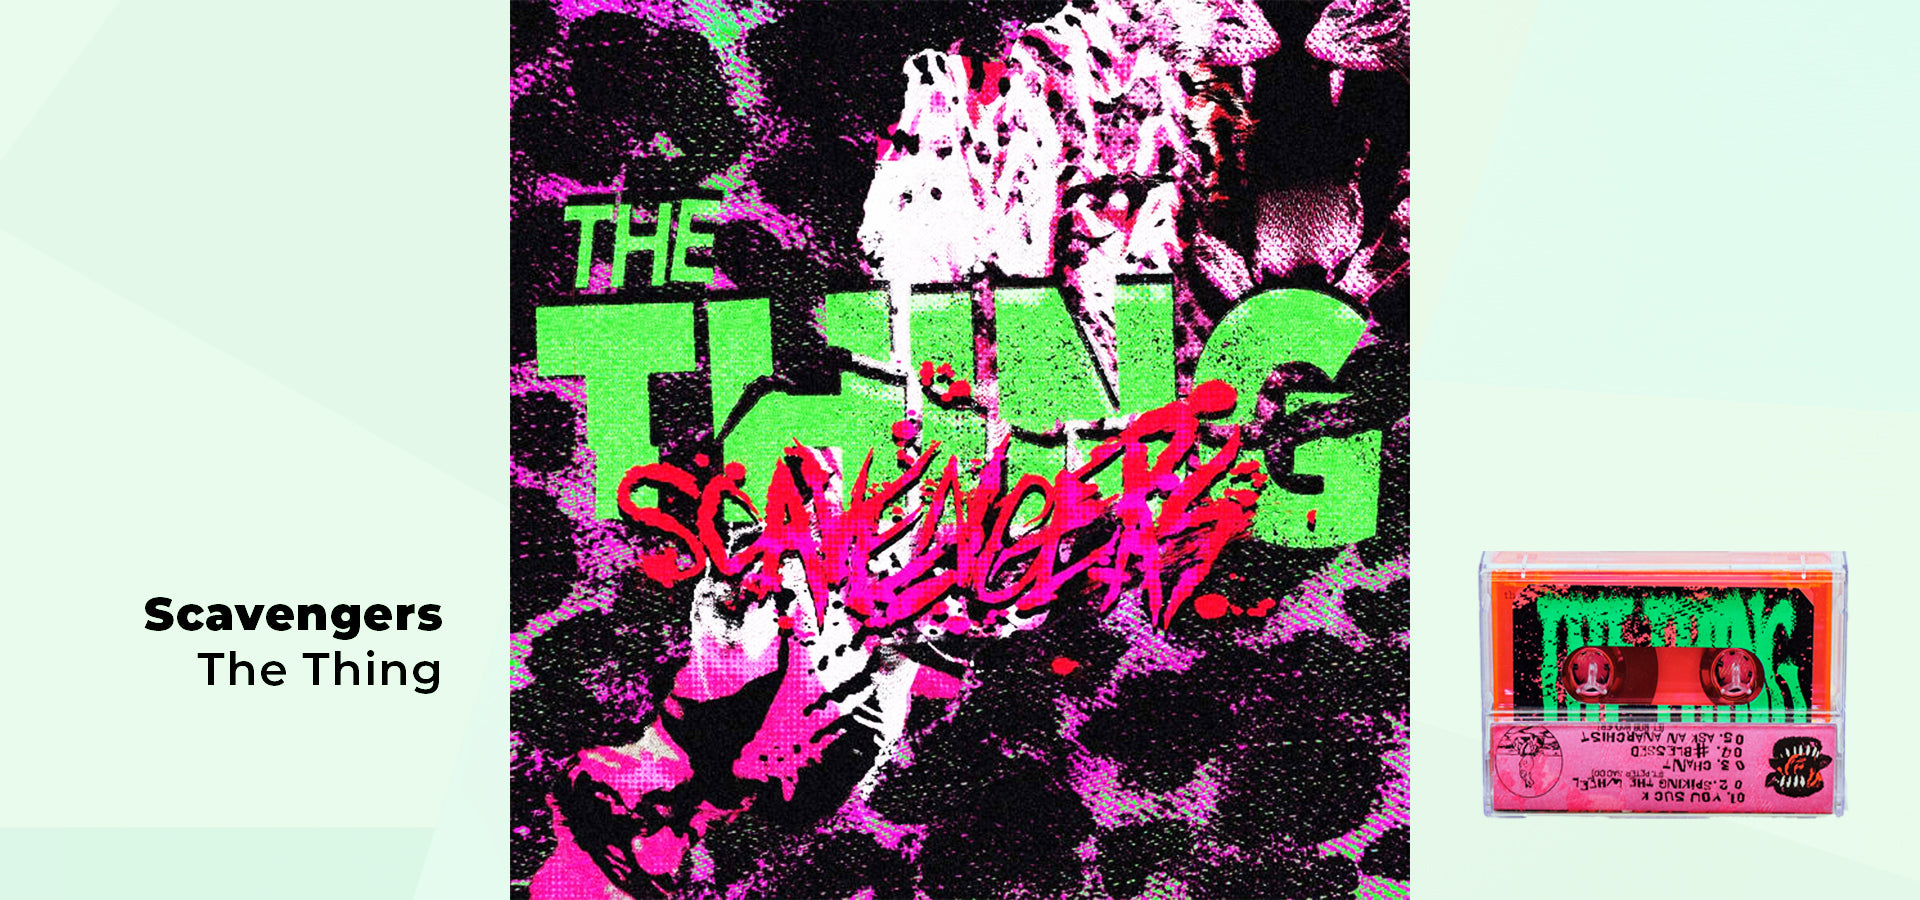 scavengers by the thing